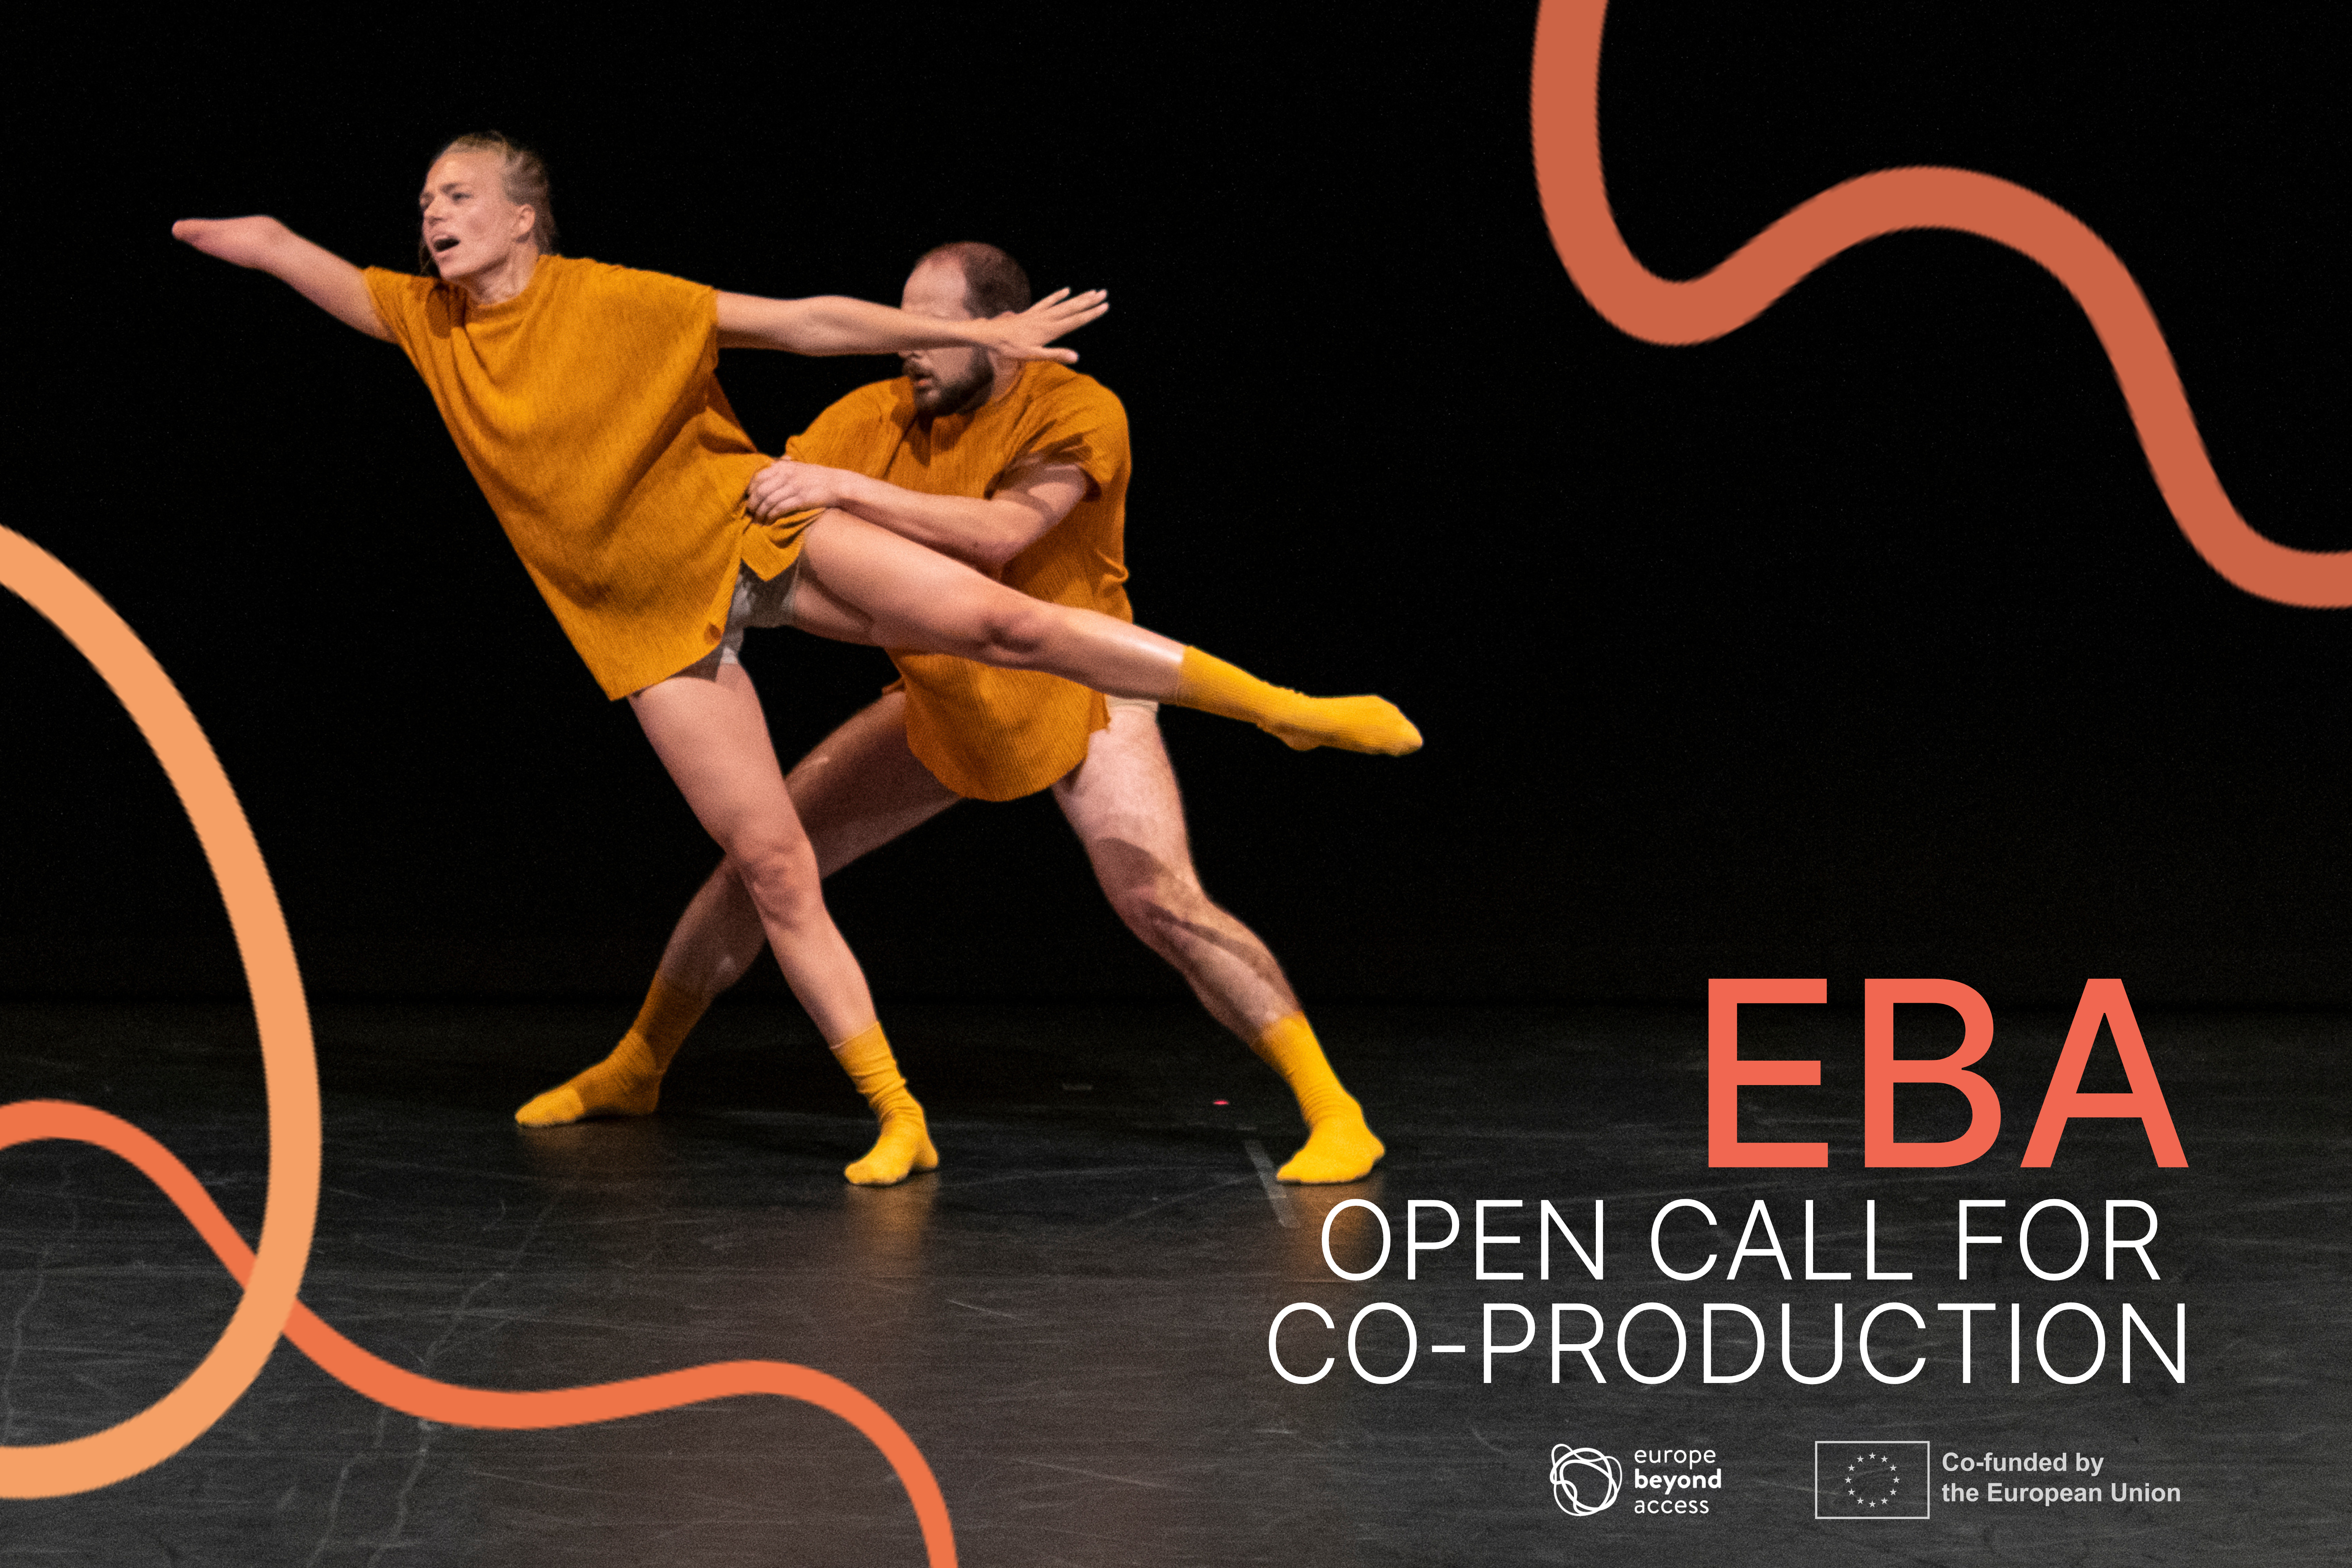 Image and link to information about open call.